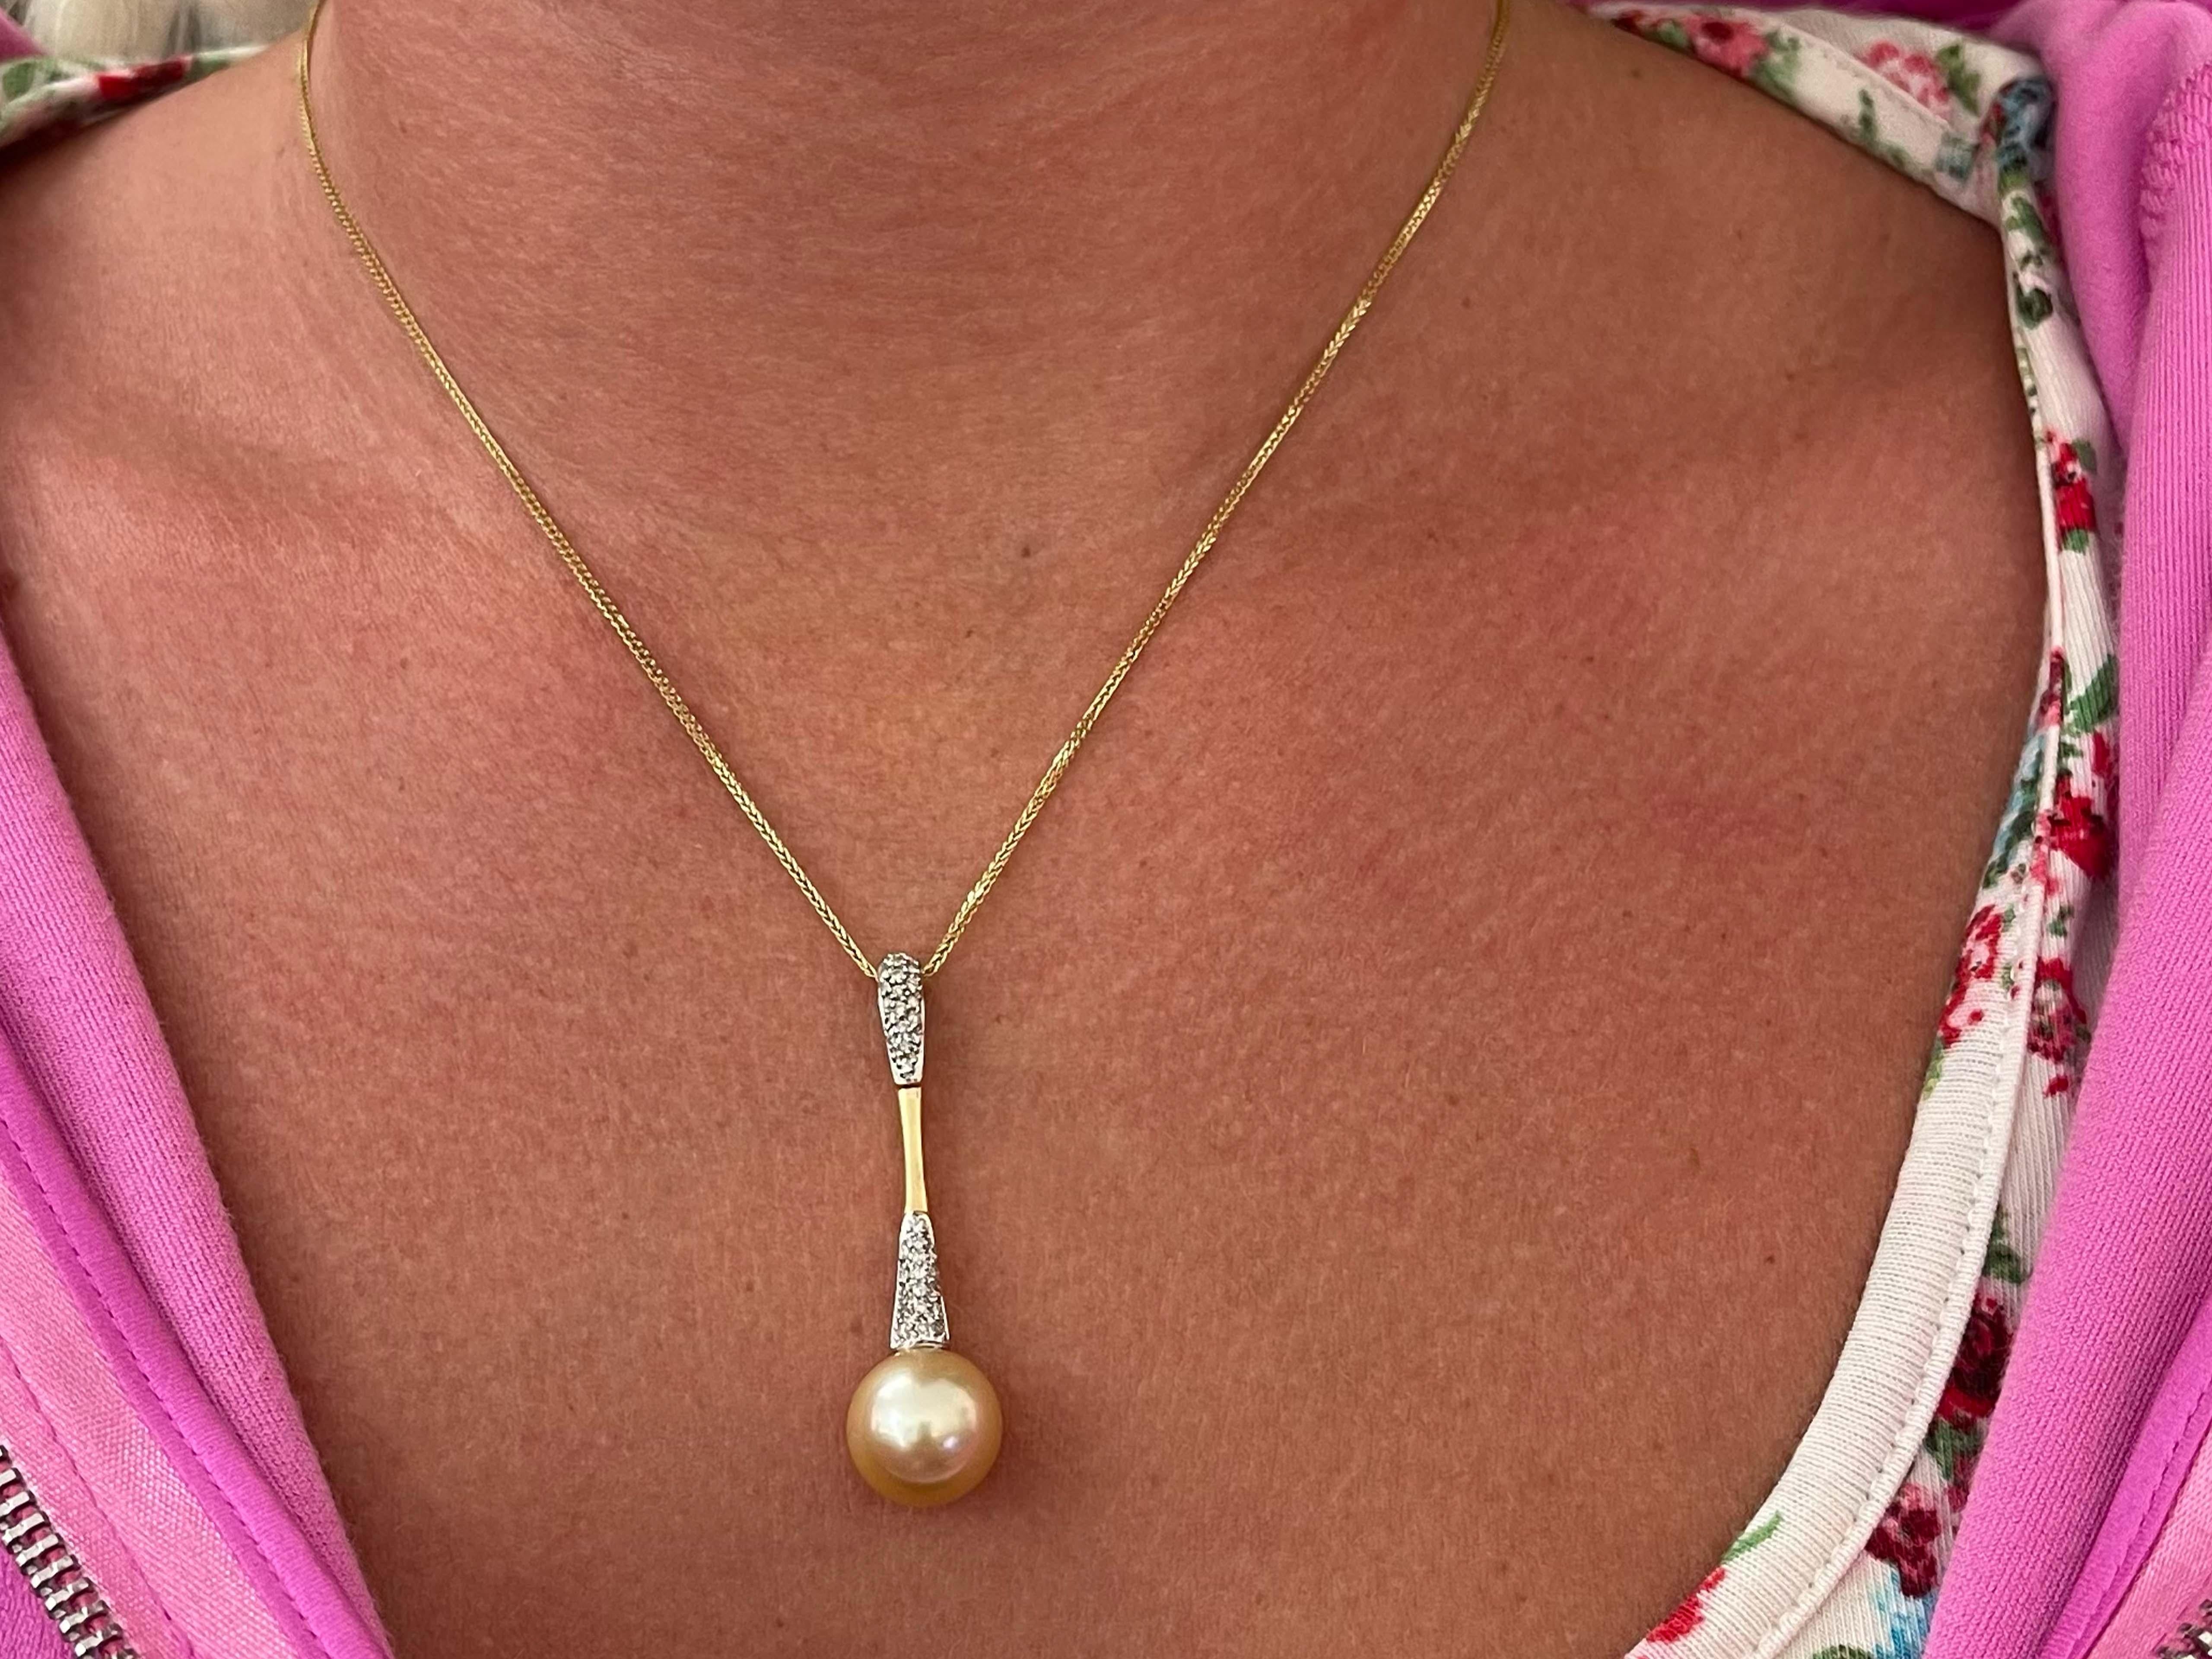 Create a touch of magic wearing this lovely south sea pearl drop necklace with diamonds. The 37 diamonds weigh 0.15 carats and are G-I color and SI clarity. The pendant drops 1.75